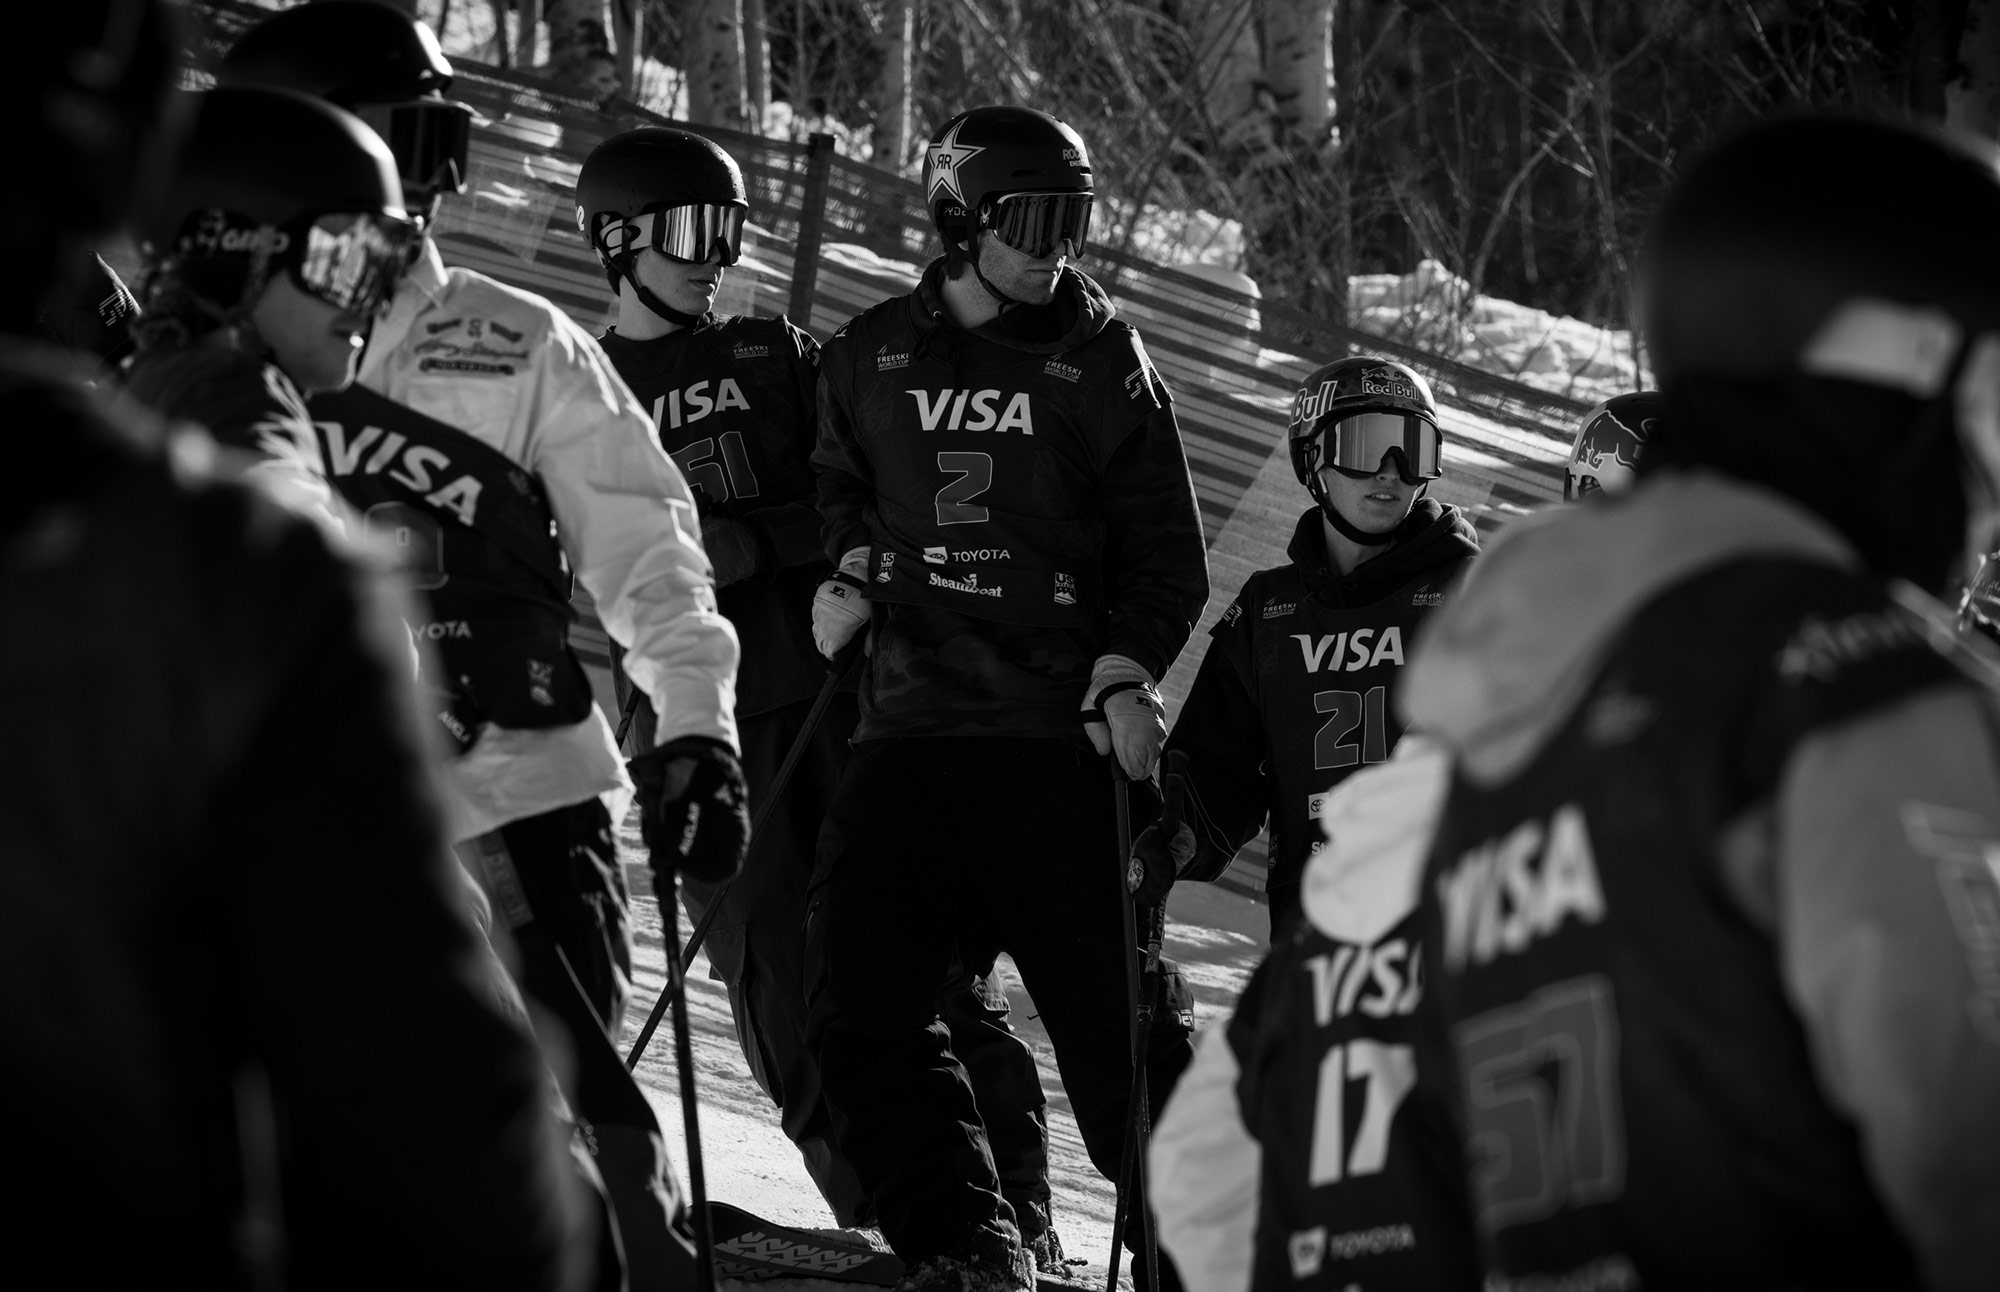 Skiers at the 2021 Visa Big Air Freeski World Cup in Steamboat, Colorado.